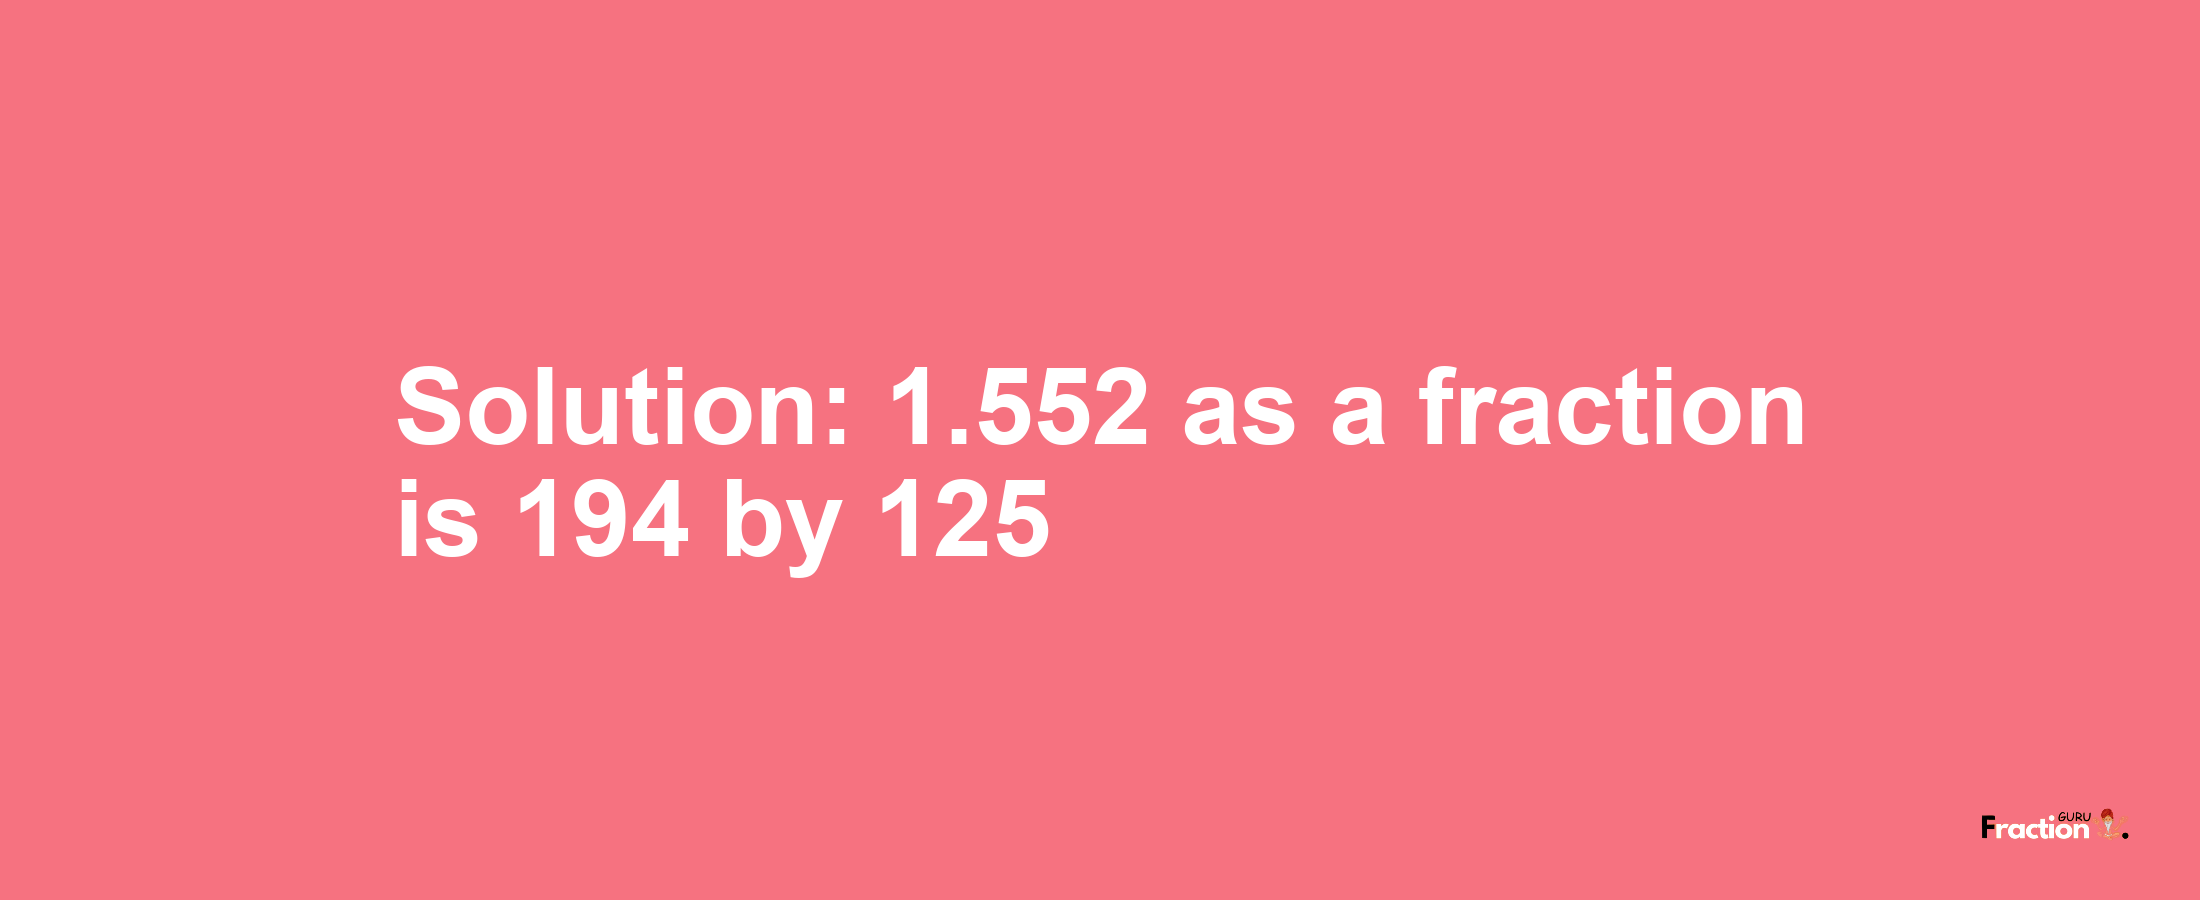 Solution:1.552 as a fraction is 194/125